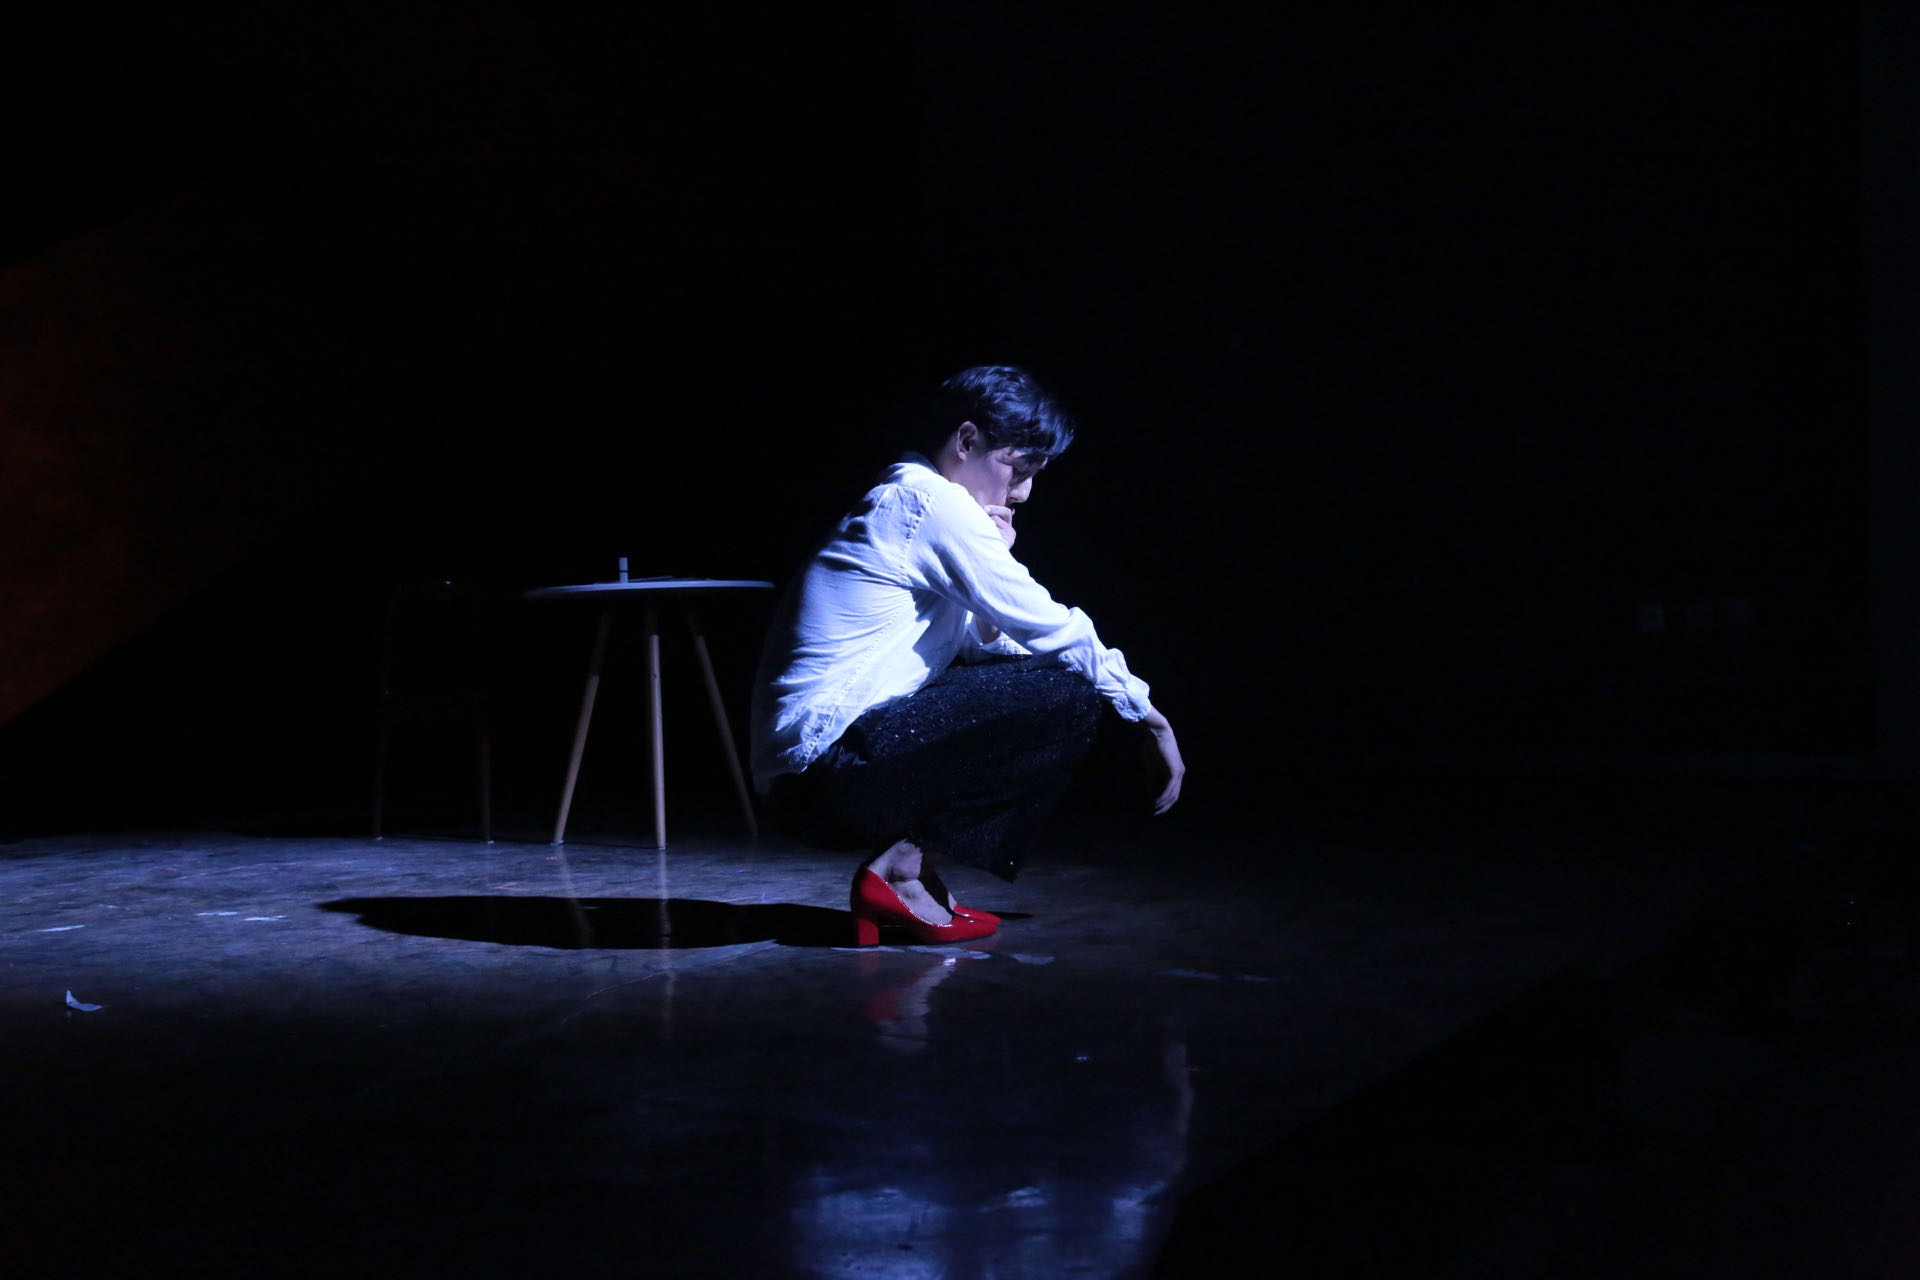 An actor squats on a dark stage in spotlight, wearing red heels, dark pants and a whie shirt.